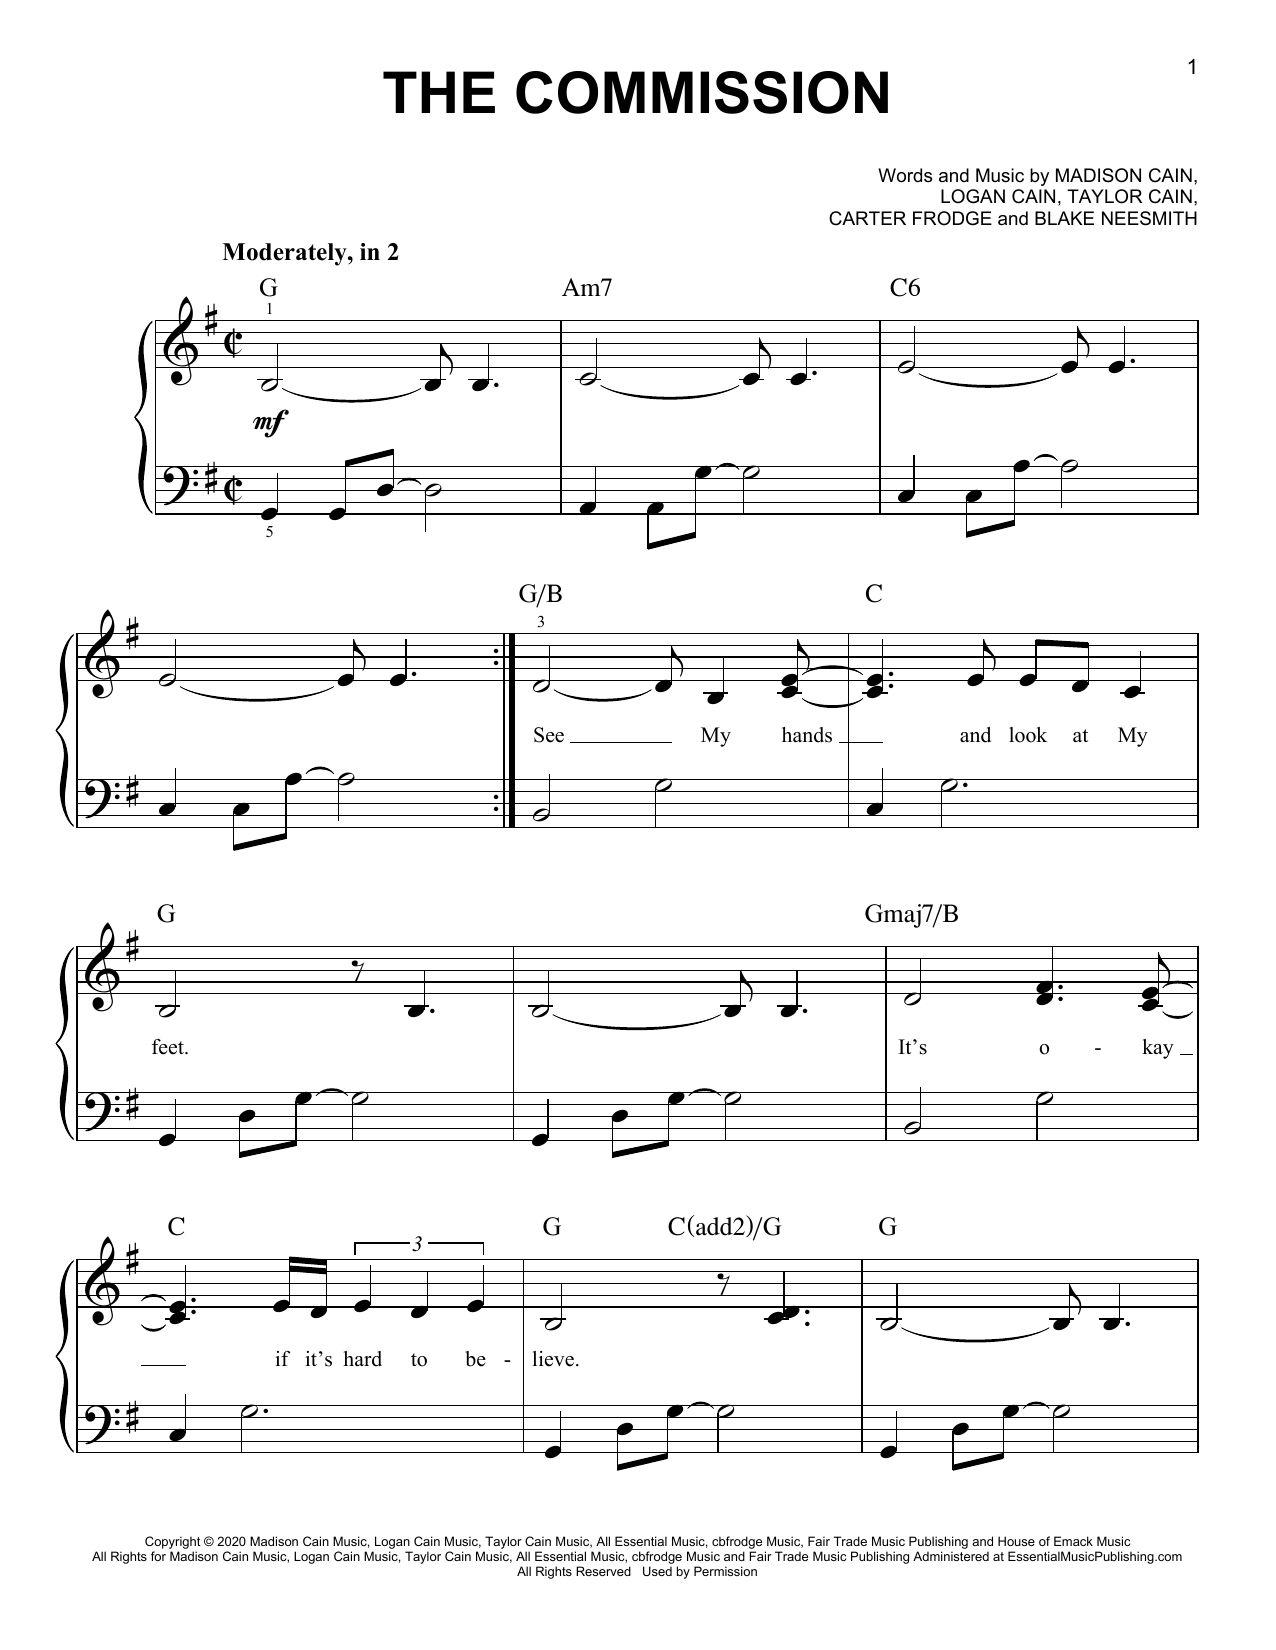 Download CAIN The Commission Sheet Music